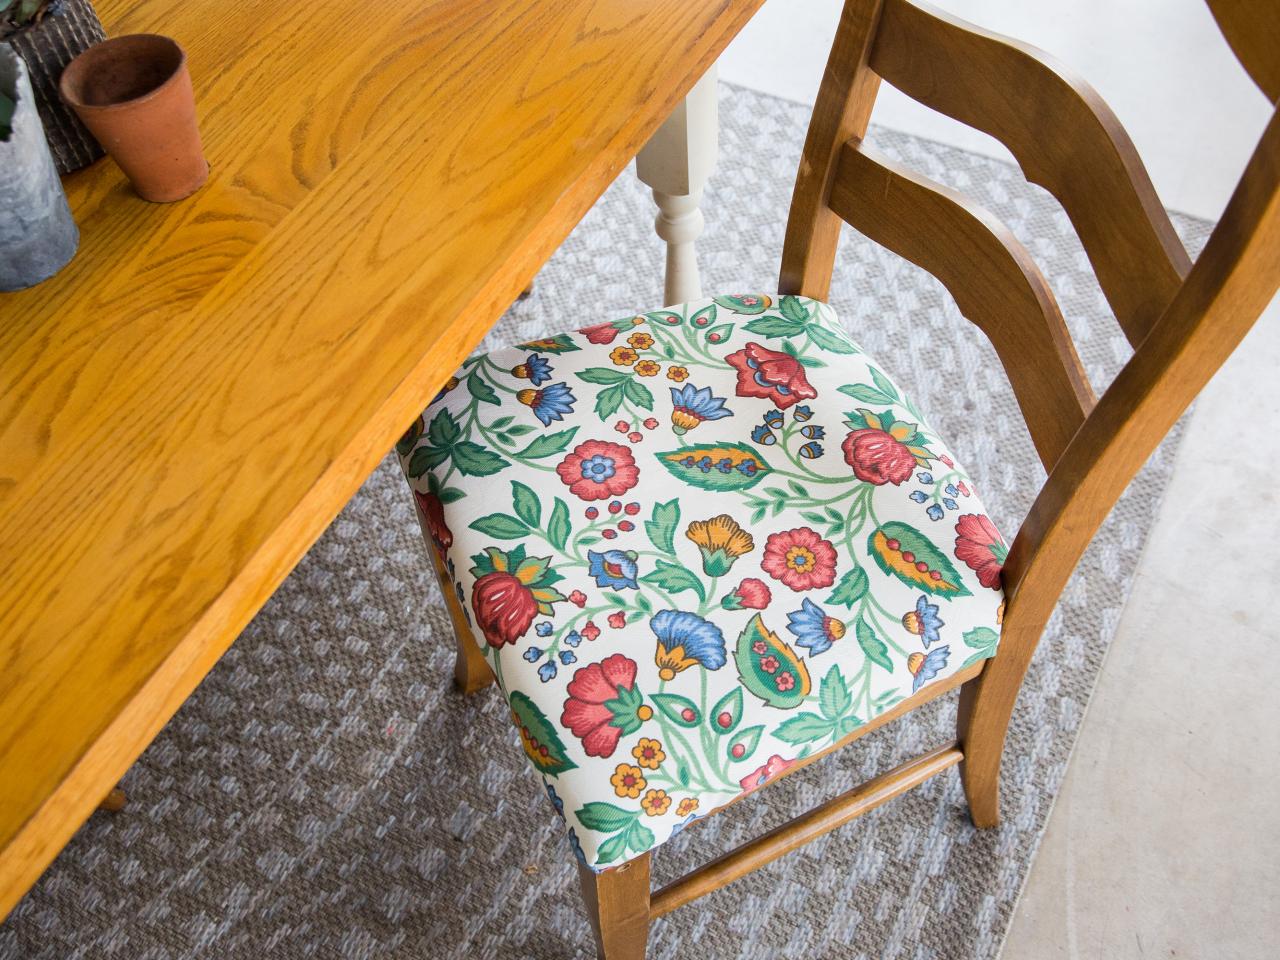 How To Re-Cover Seats On Dining Room Chairs